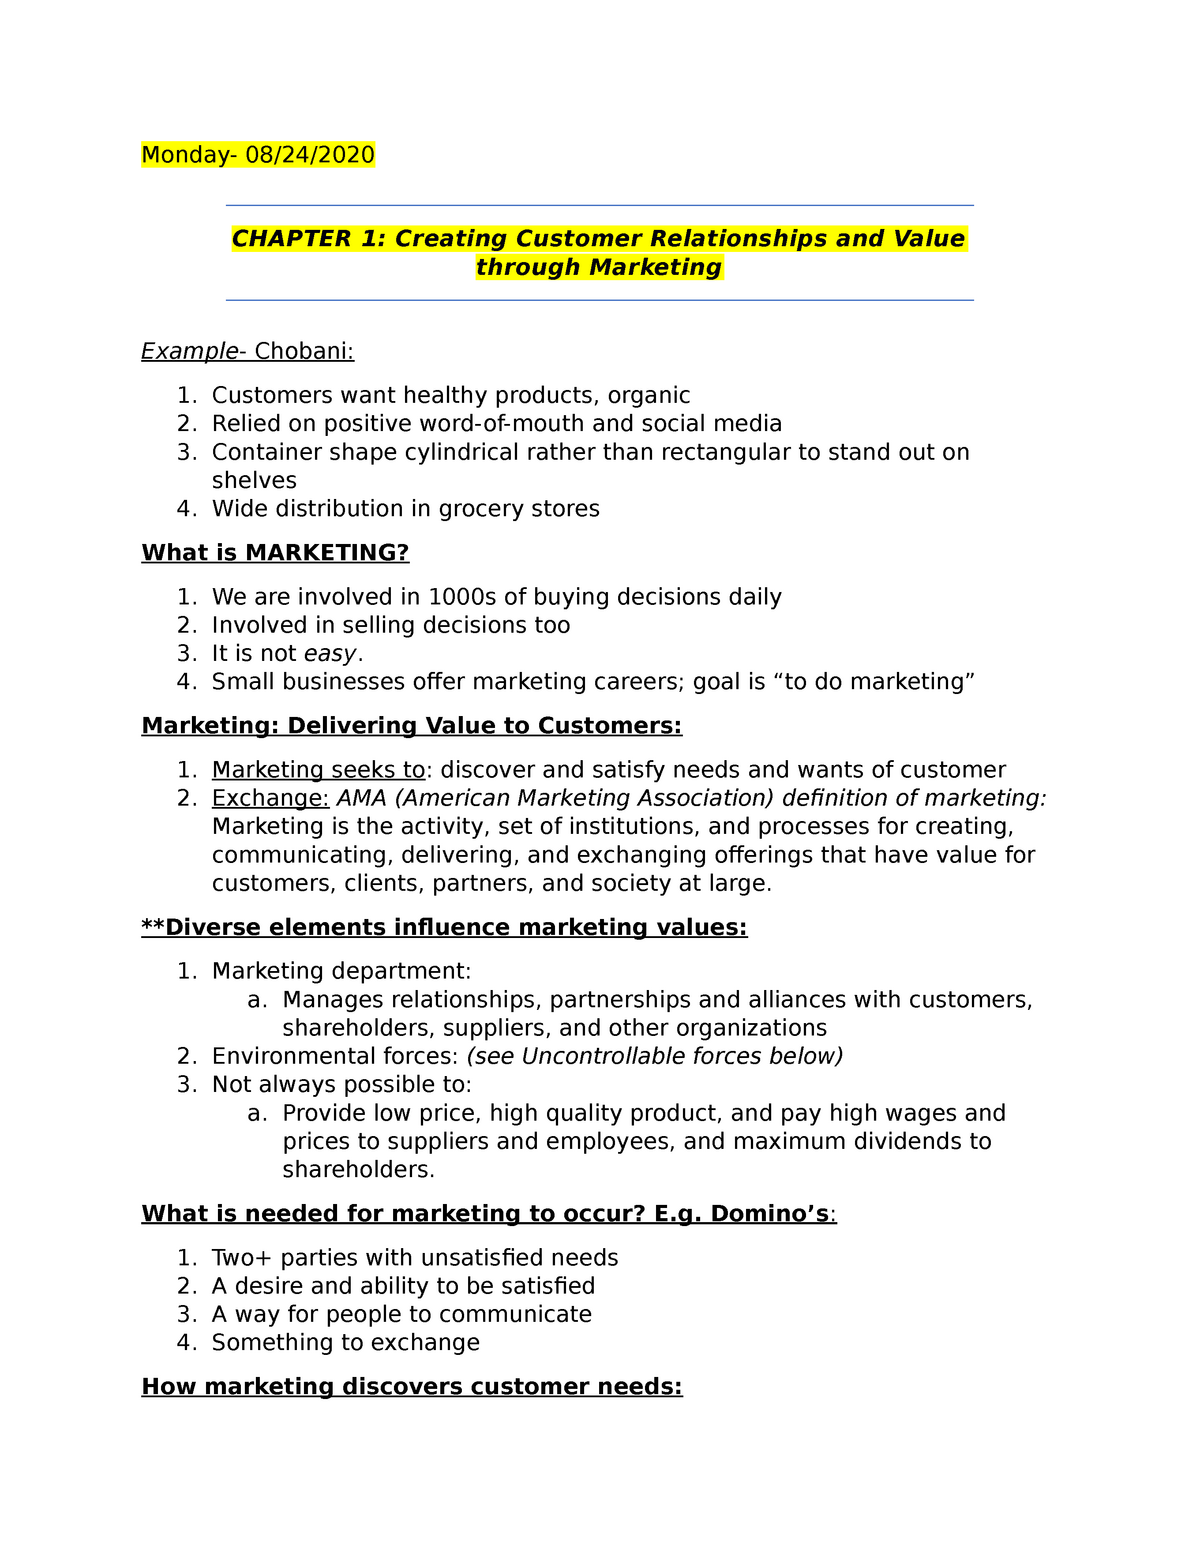 Mkt Notes From Mcgraw Hill Connect Mkt 3300 Textbook Monday 0824 Chapter 1 Creating 7999